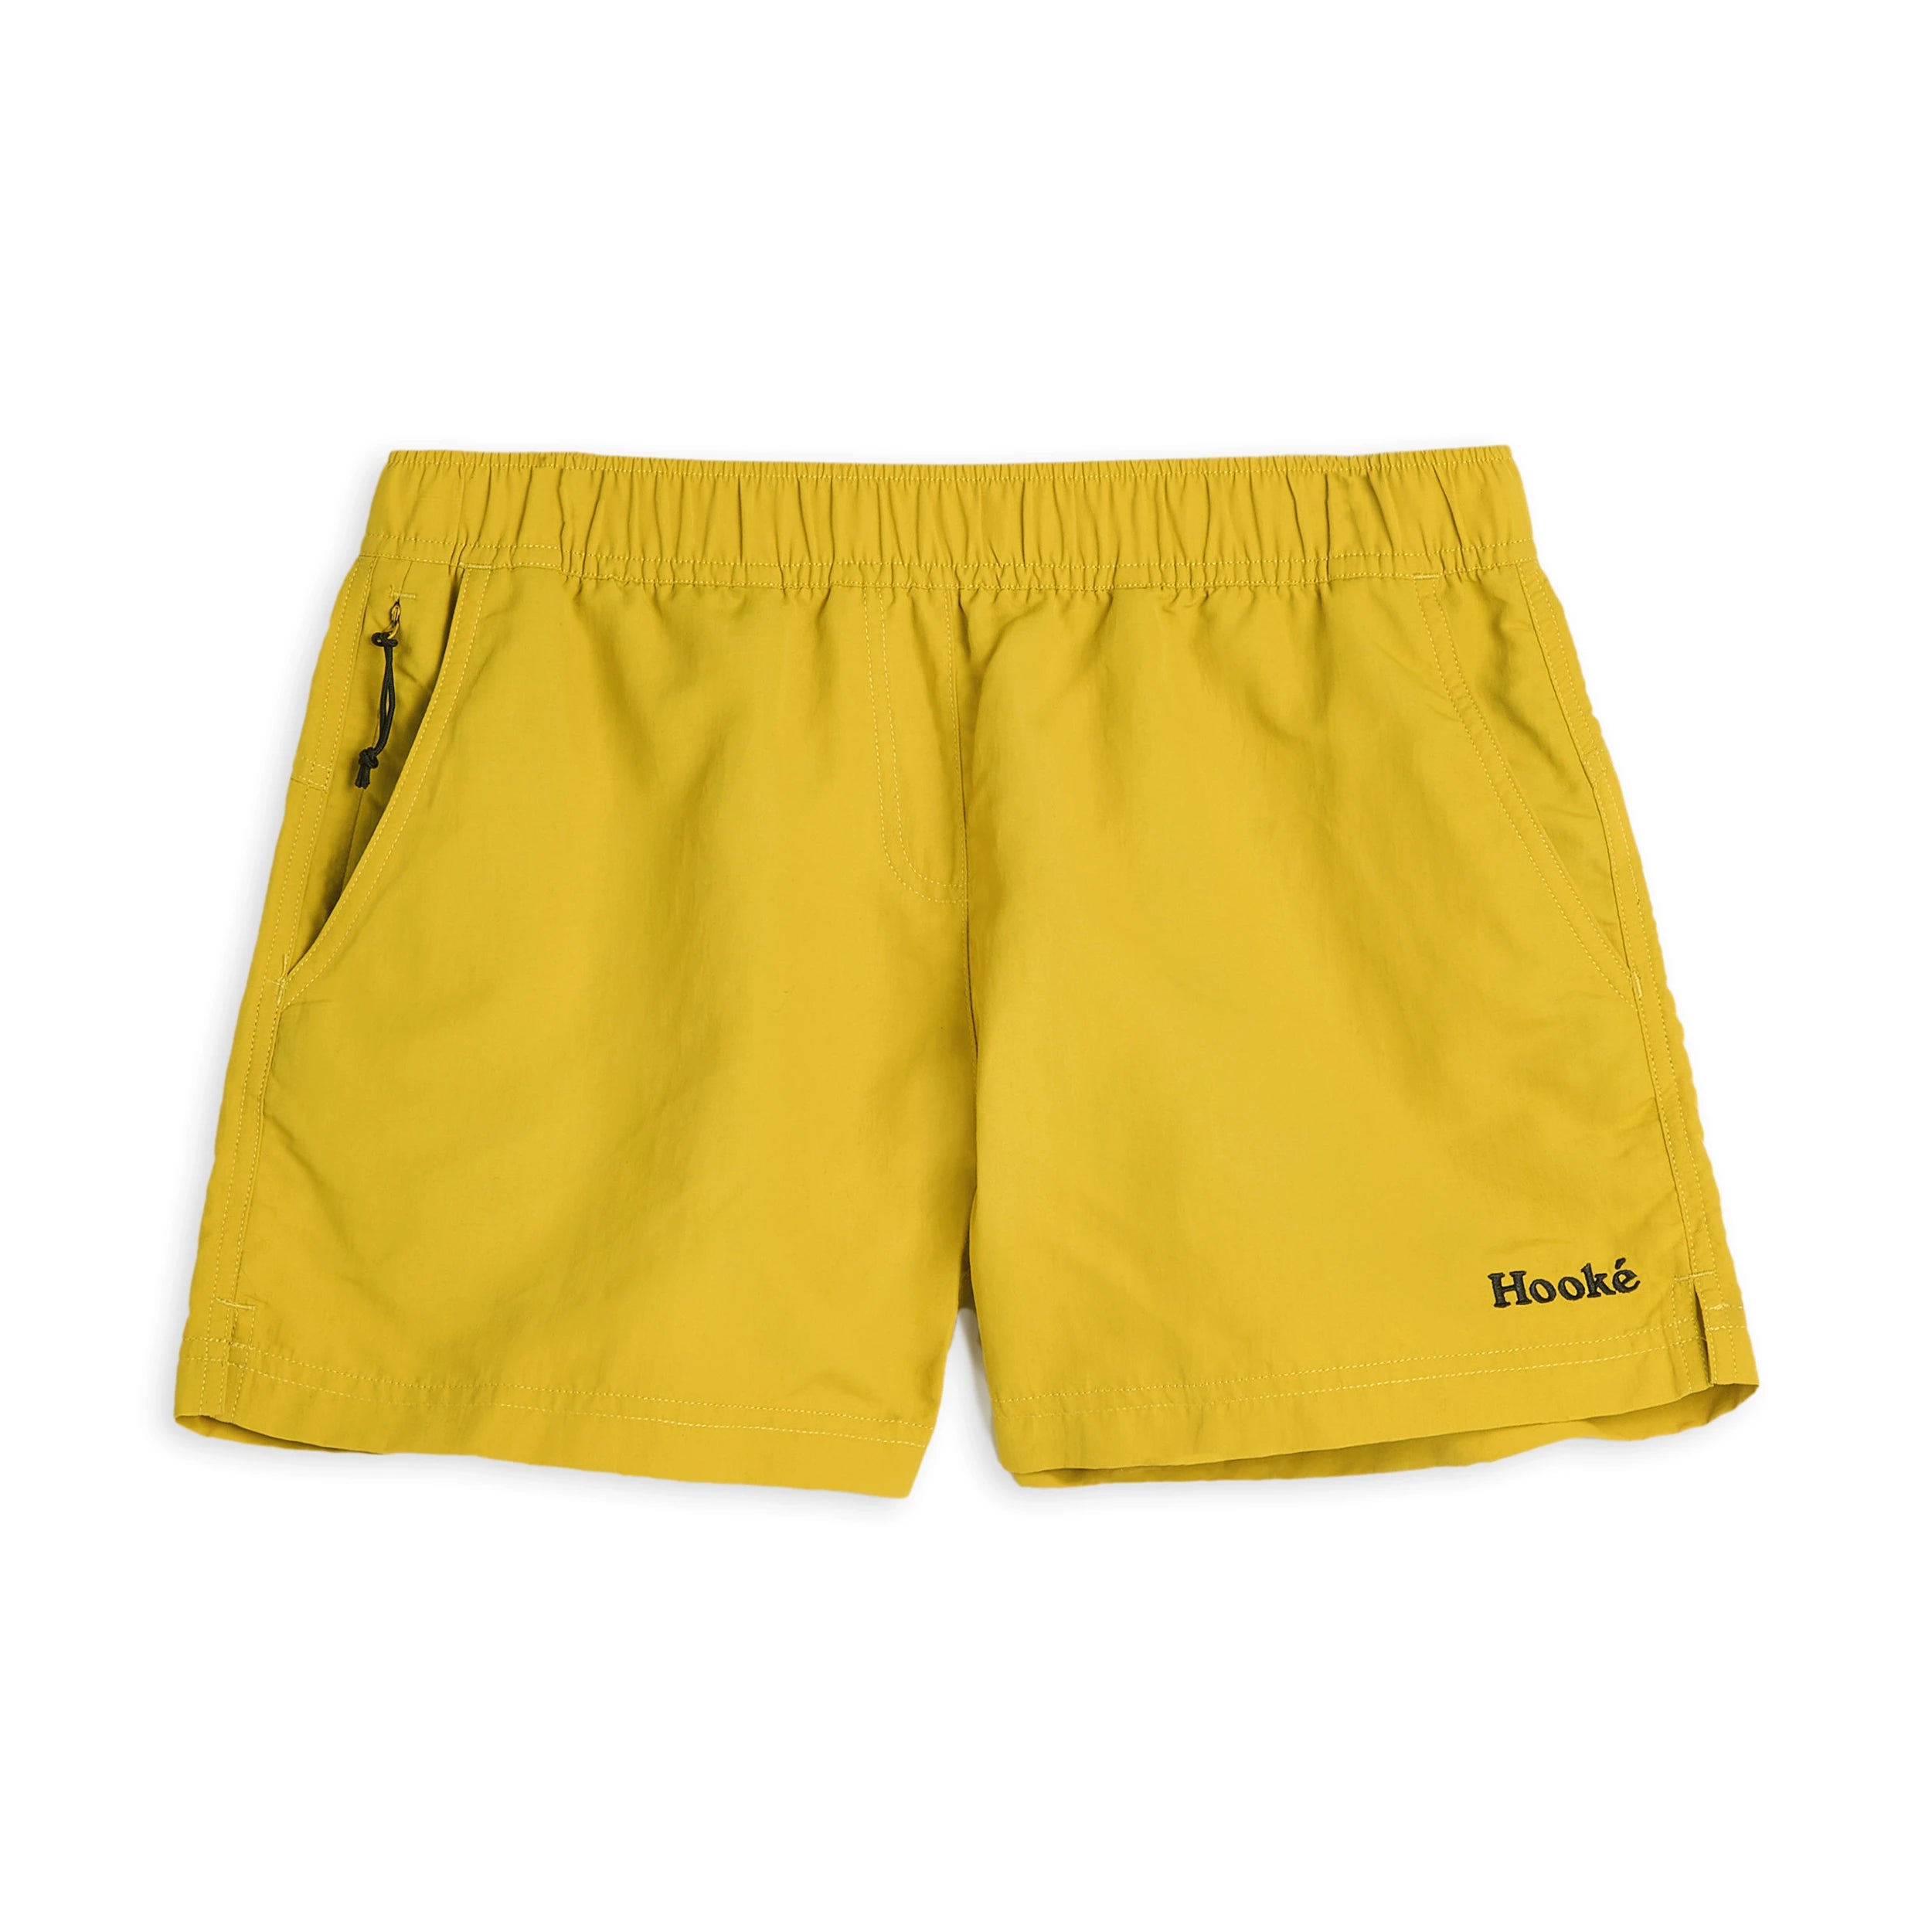 W's River Shorts